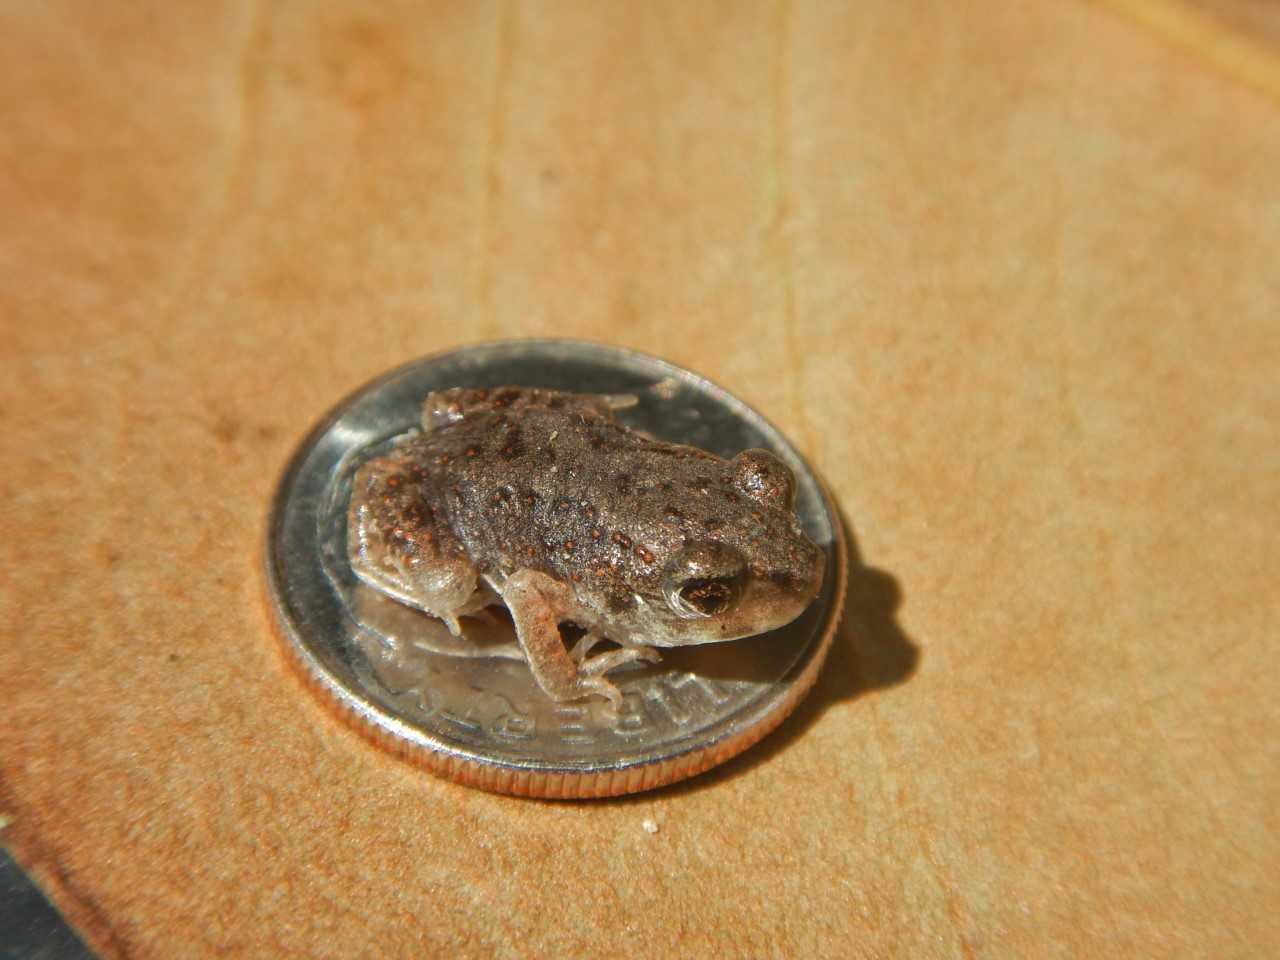 A close-up photo of one of the above-described raisin-sized froglets seated on a dime. It fits easily within the area of the dime, leaving a substantial margin uncovered: a very small frog.